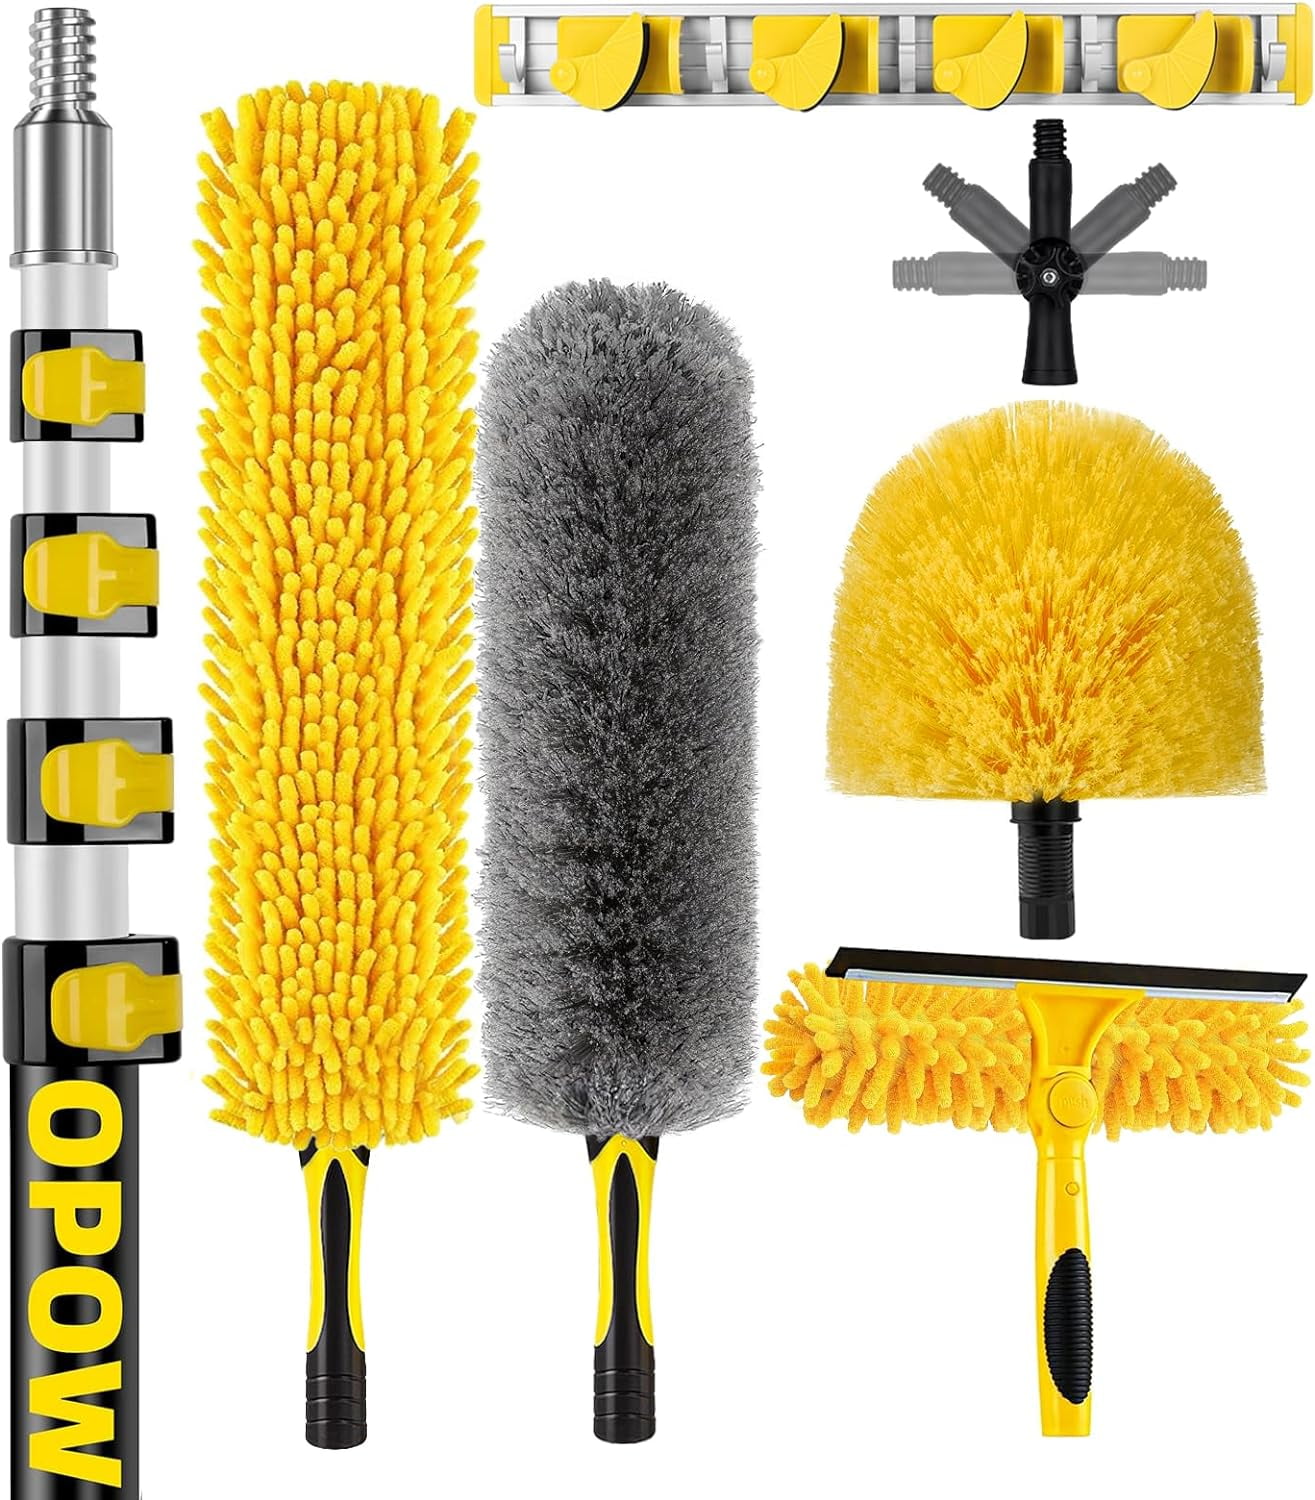 30 Foot High Ceiling Duster Kits with 7-24ft Heavy Duty Extension